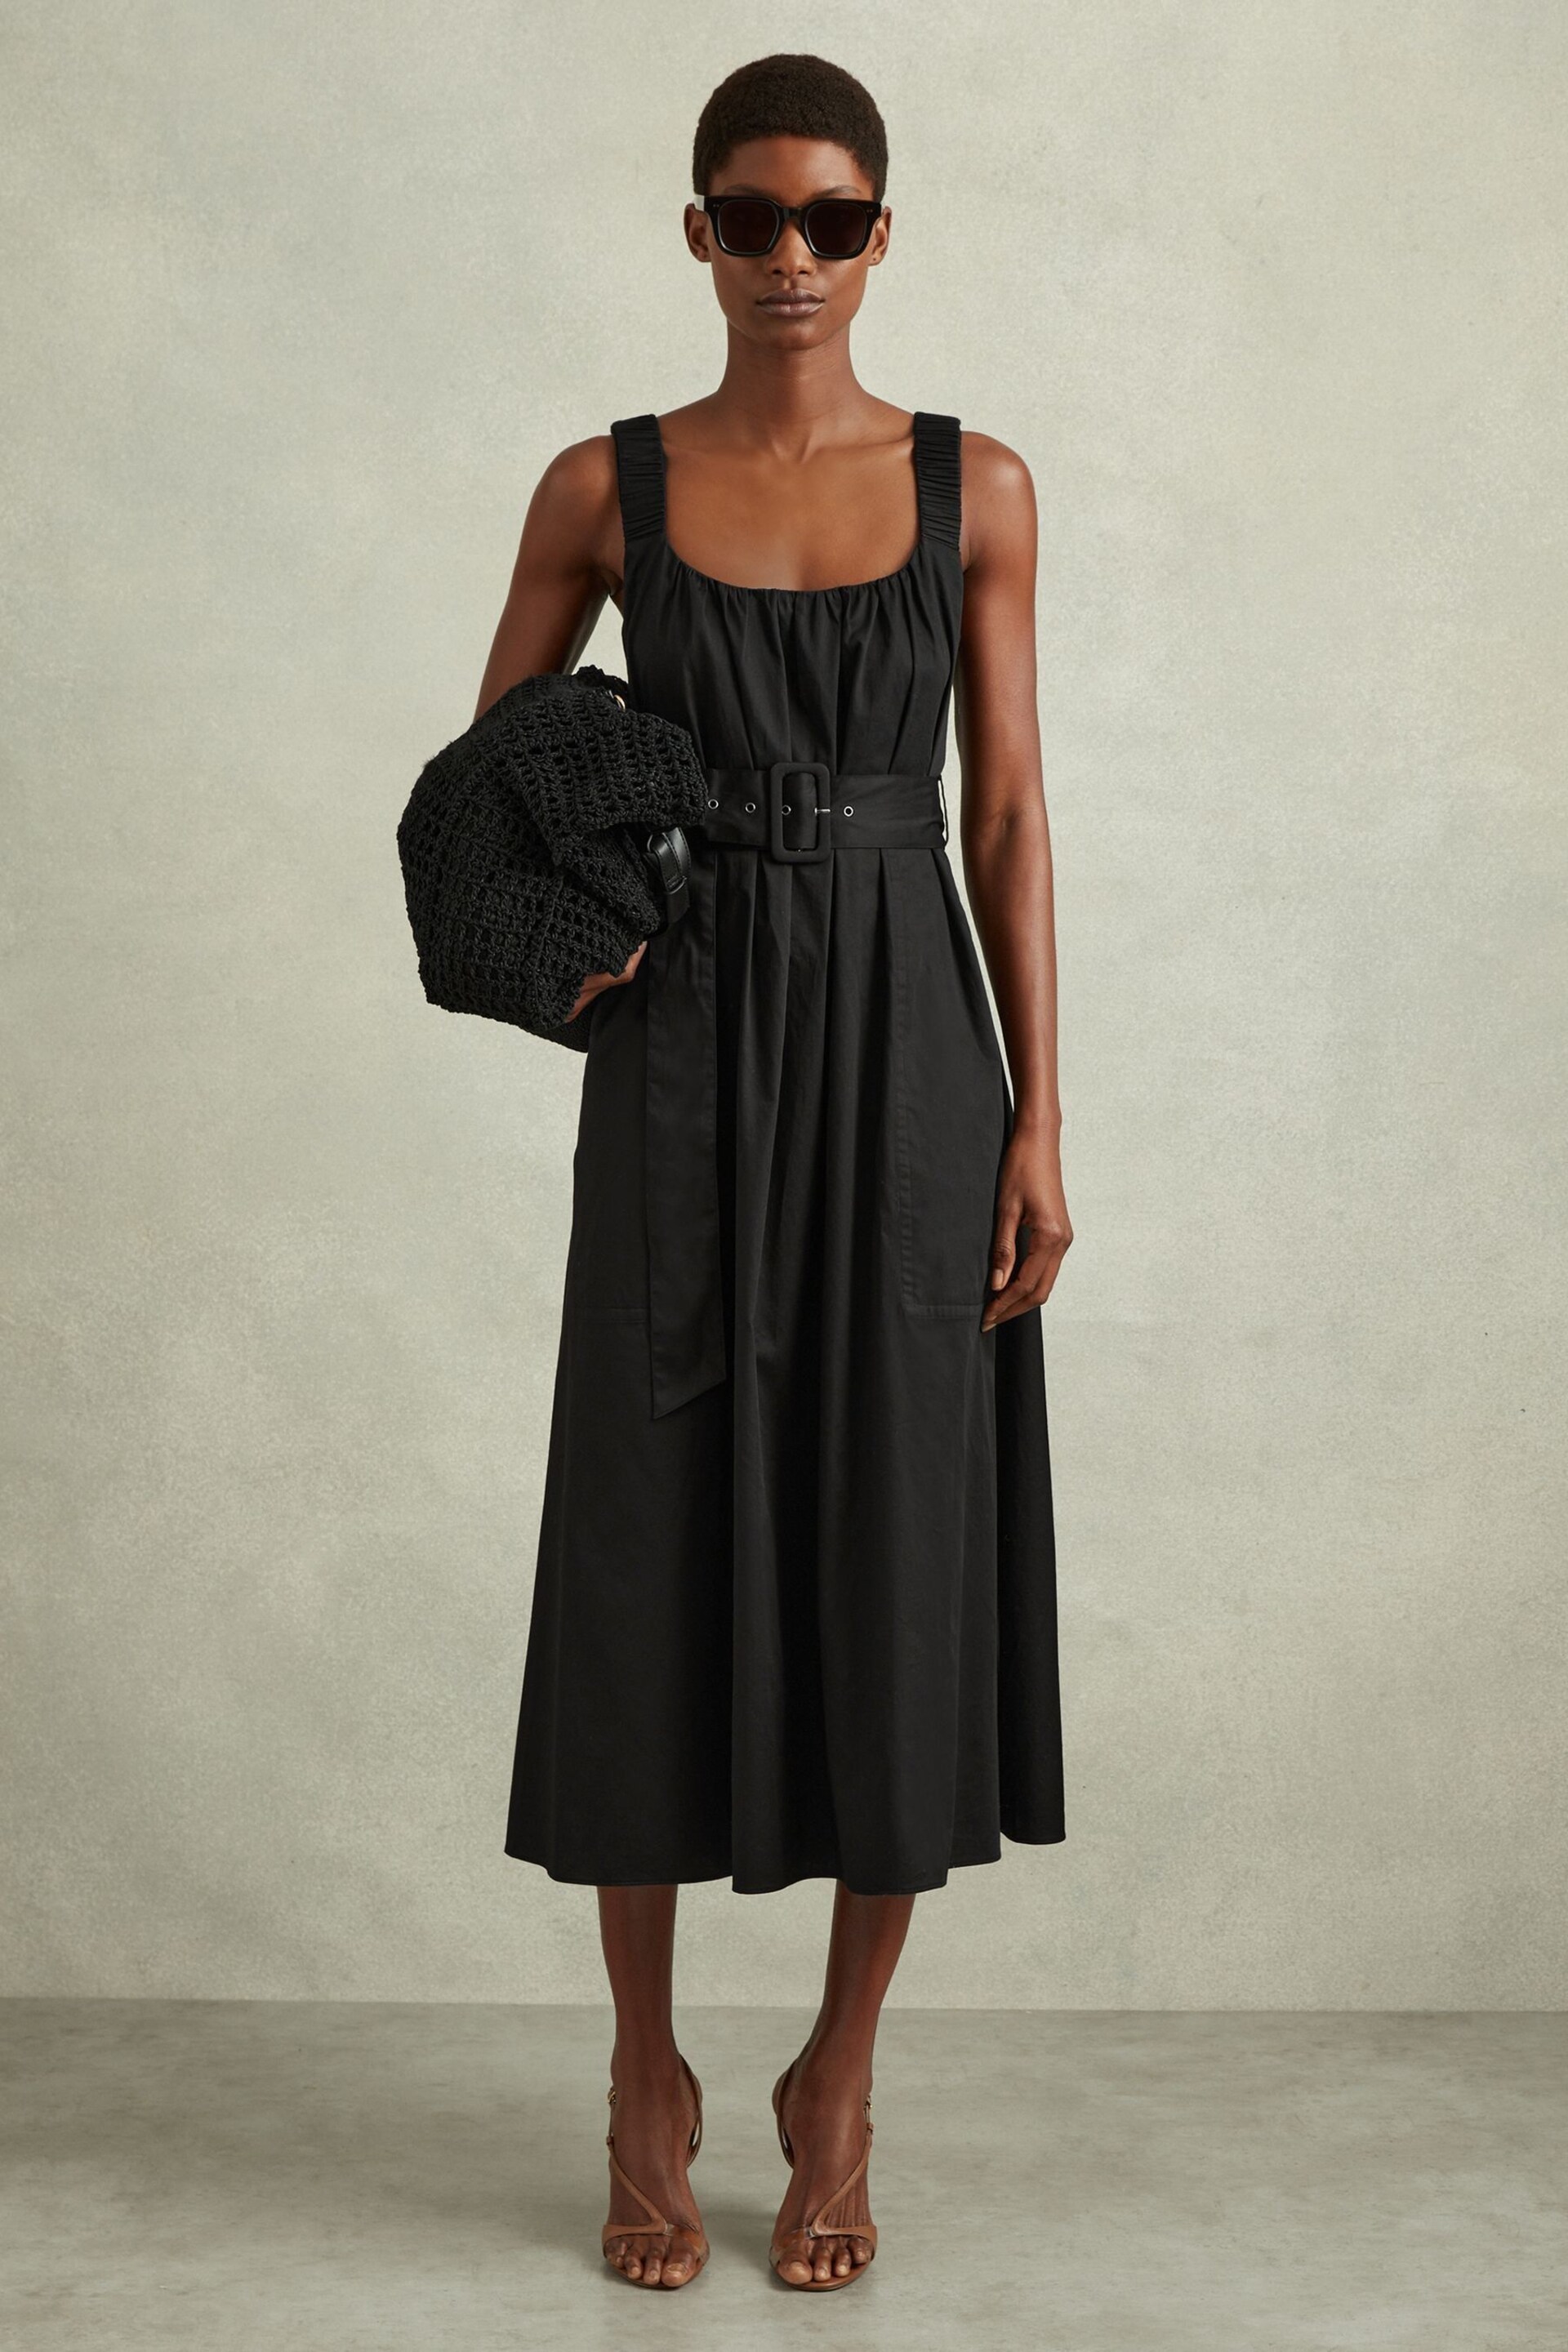 Reiss Black Liza Petite Cotton Ruched Strap Belted Midi Dress - Image 3 of 5